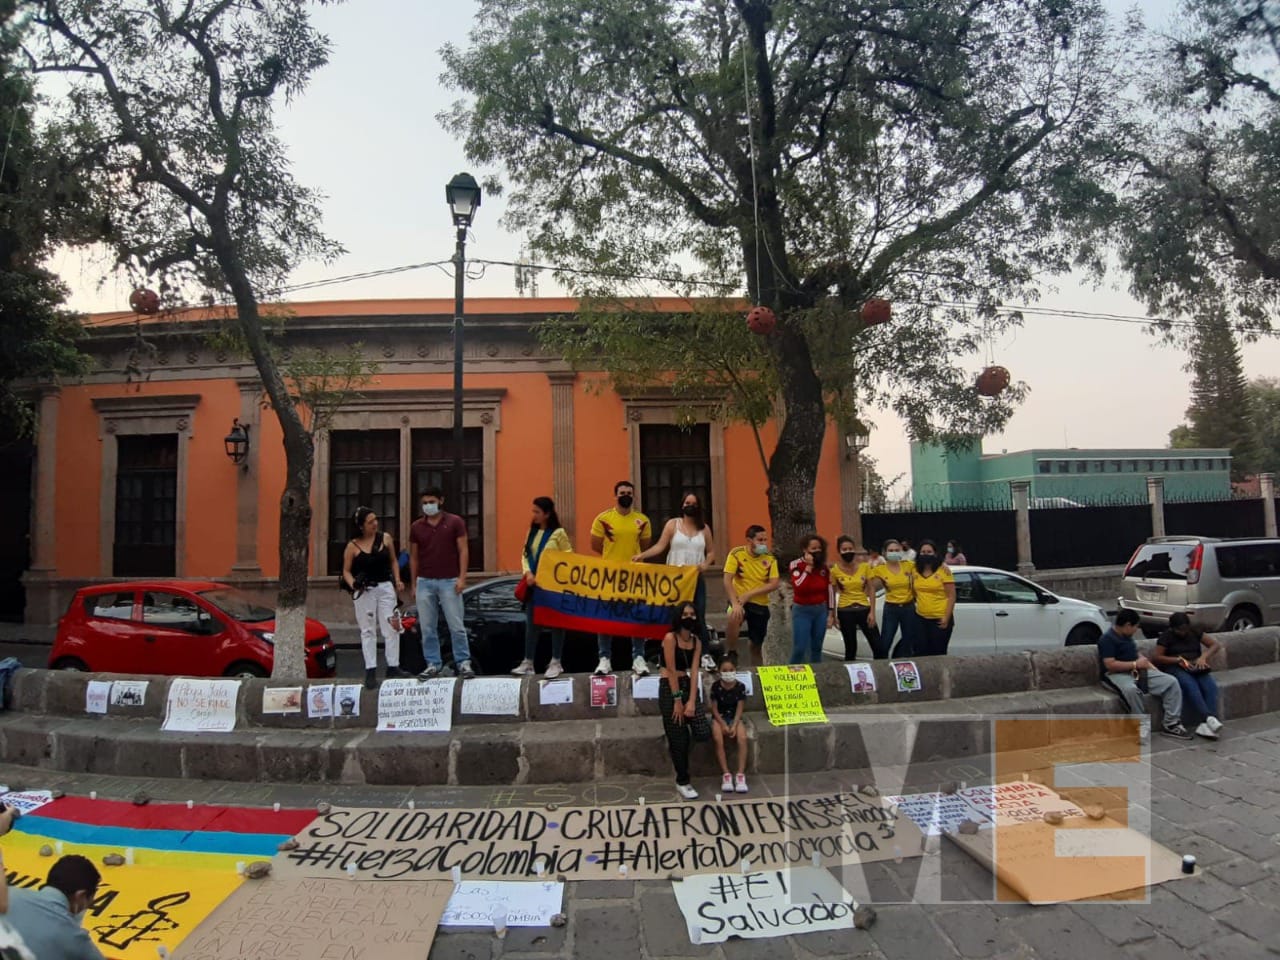 Colombians based in Morelia protest against violence in their country